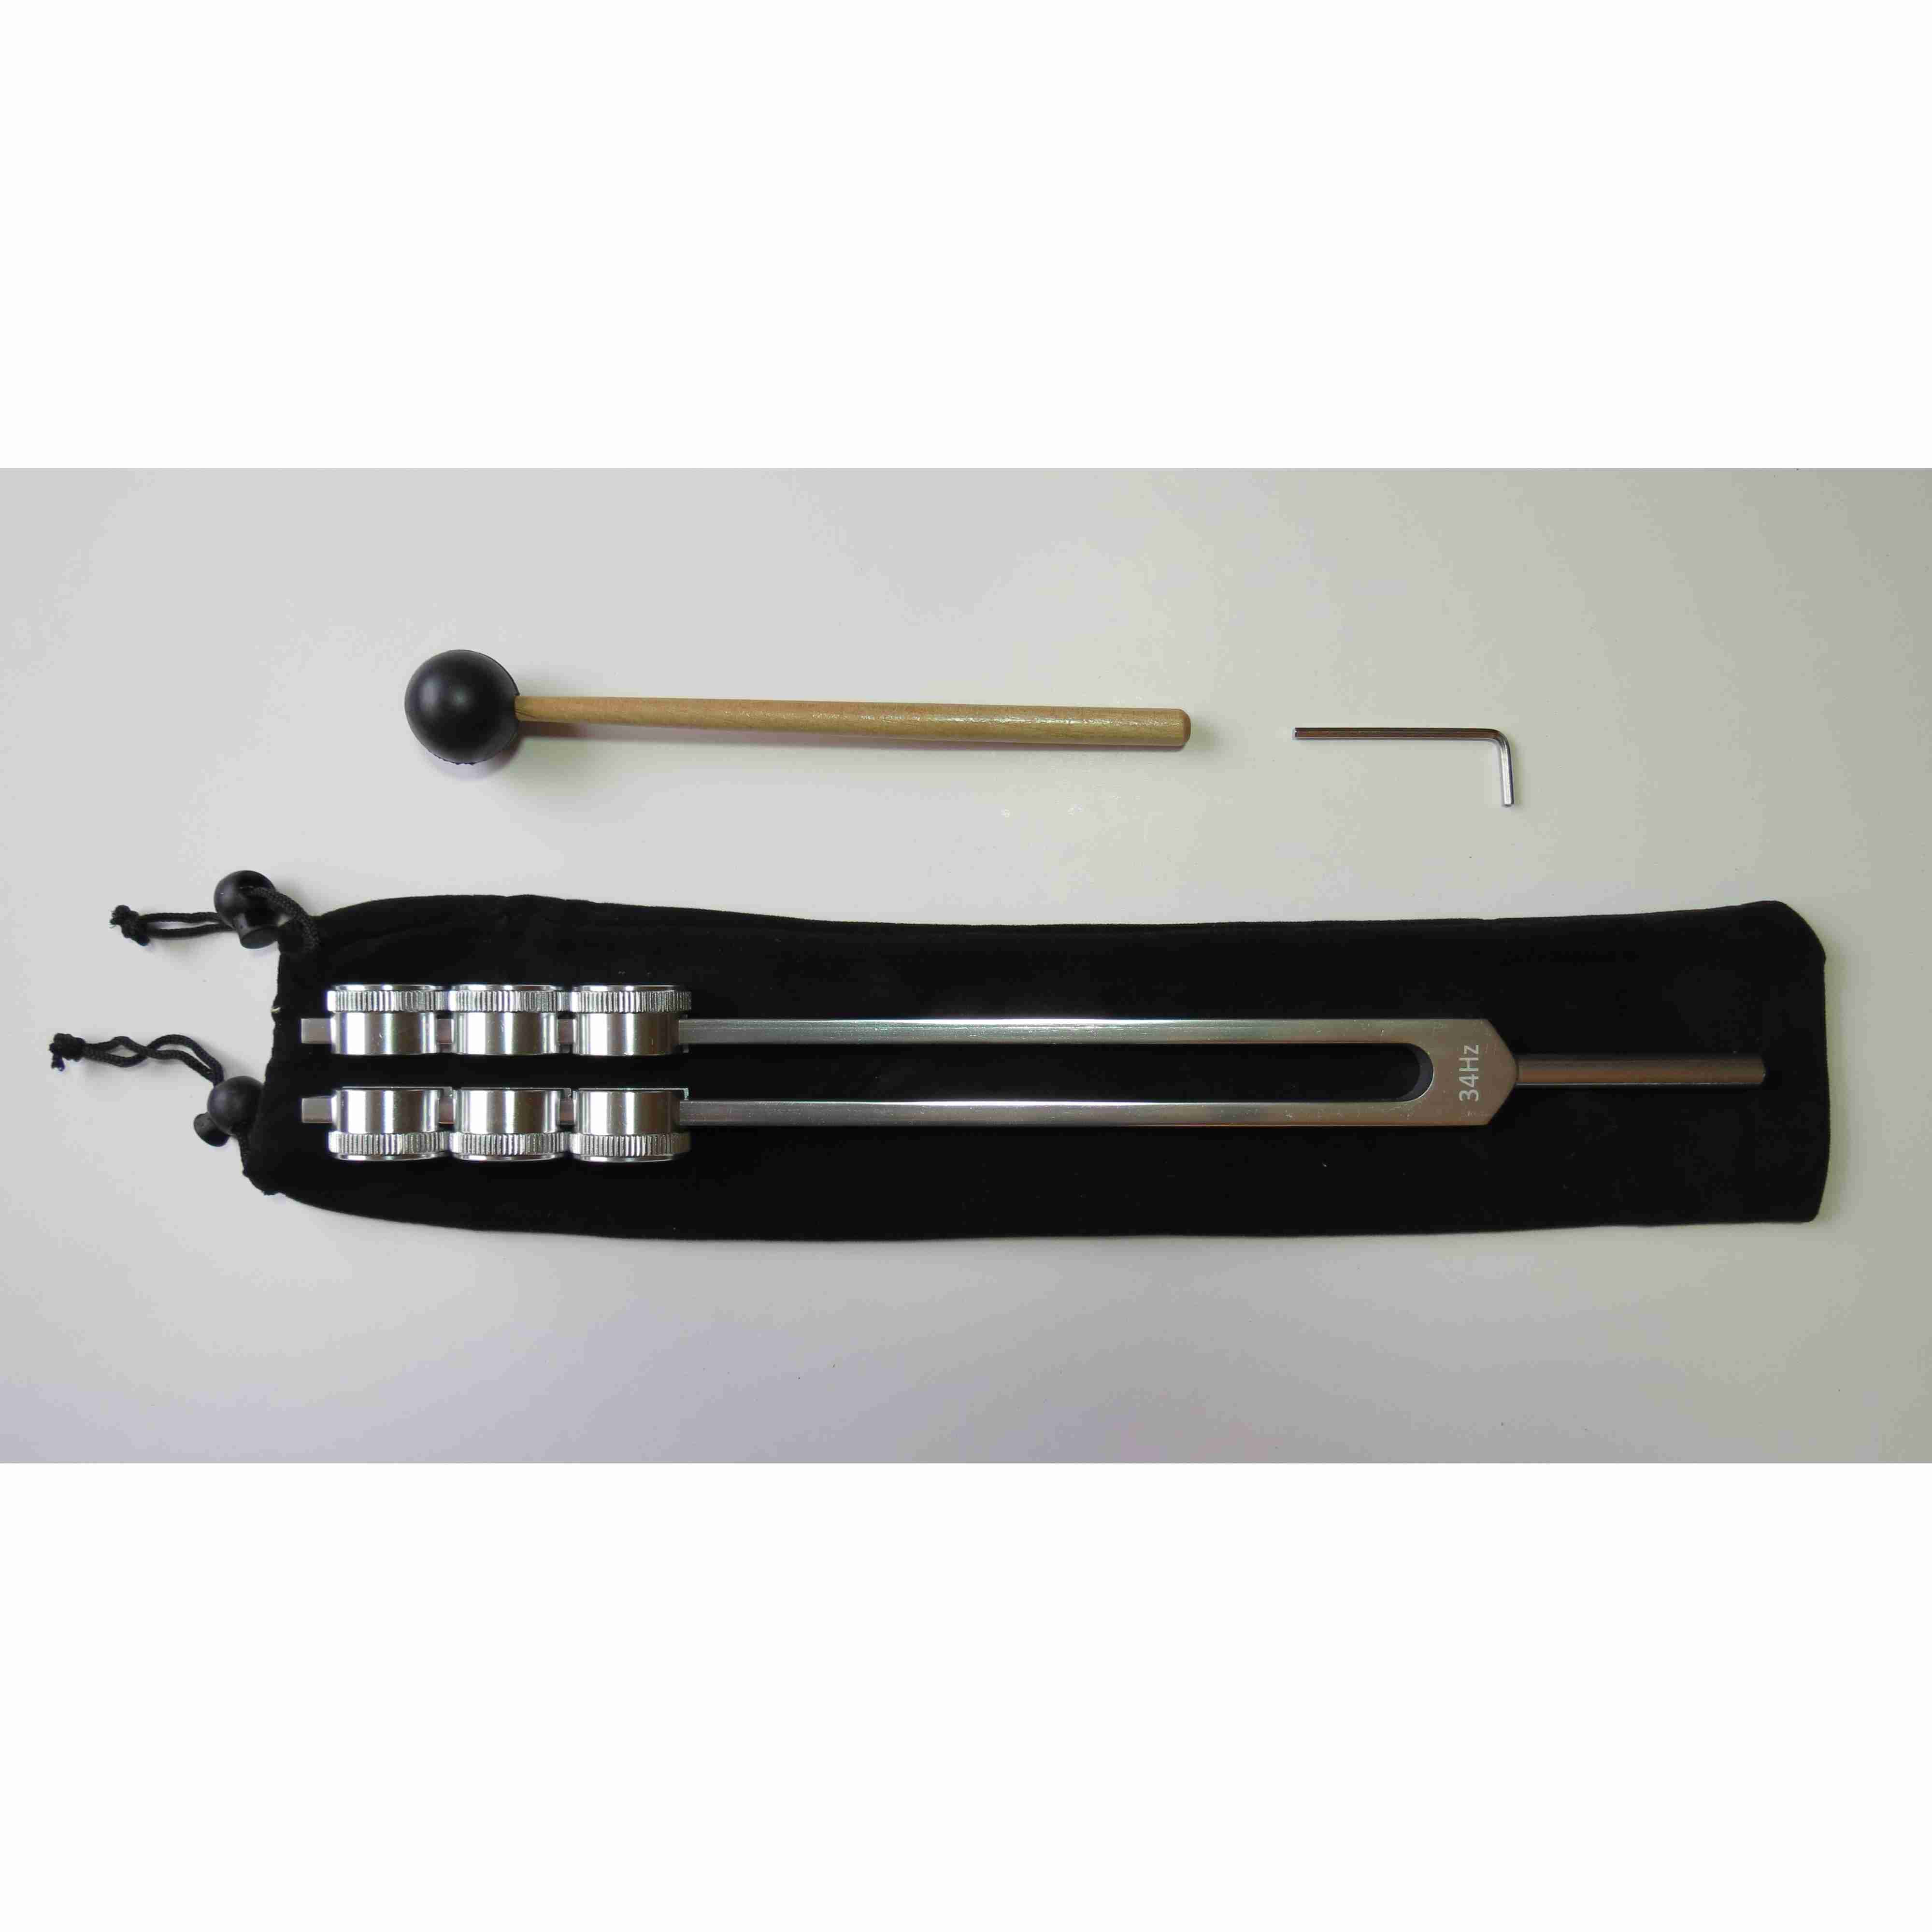 Tuning-Forks with cash back rebate